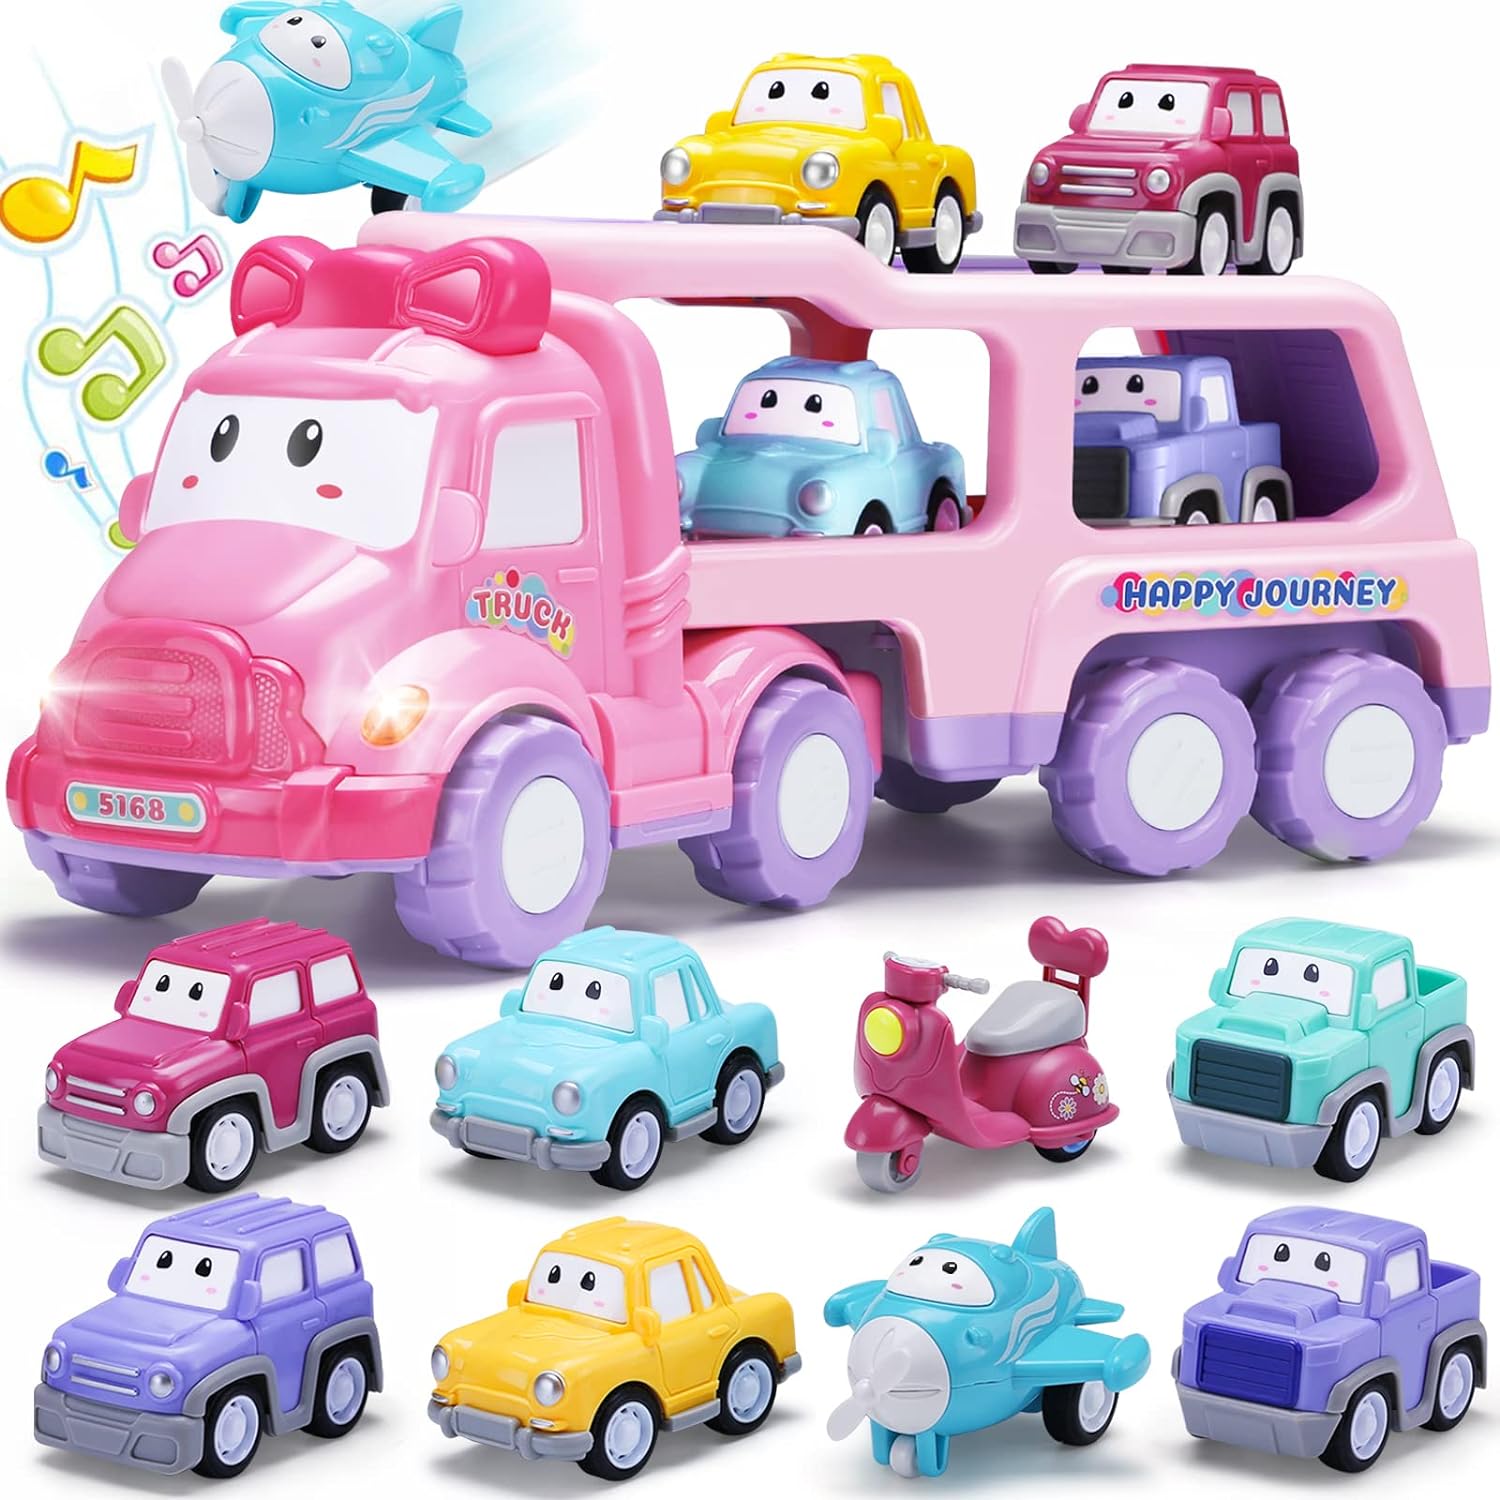 Cartoon Vehicle Toy for Toddler Girl, 9-in-1 Pink Carrier Truck for Baby Girls, Friction Power Transport Car with Light and Sound